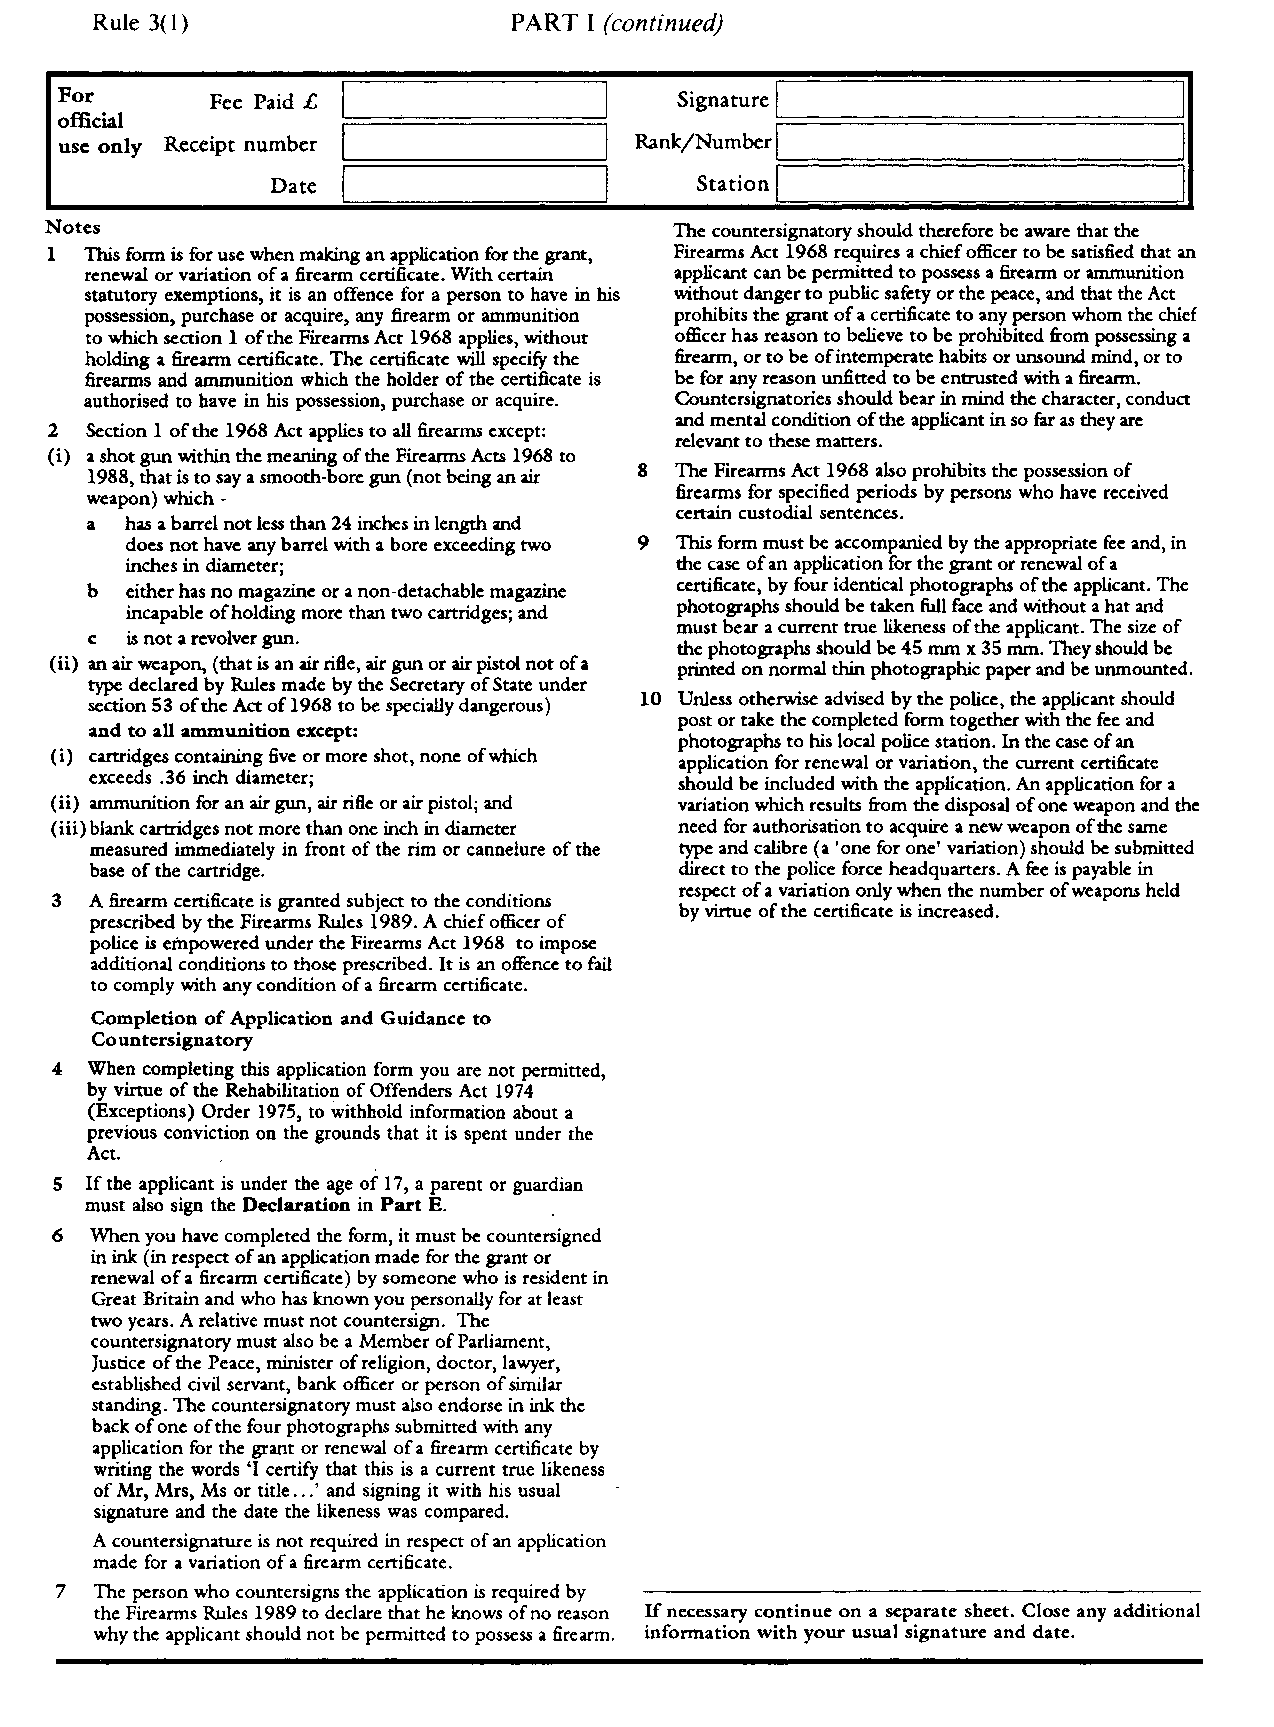 The Firearms (Scotland) Rules 1989